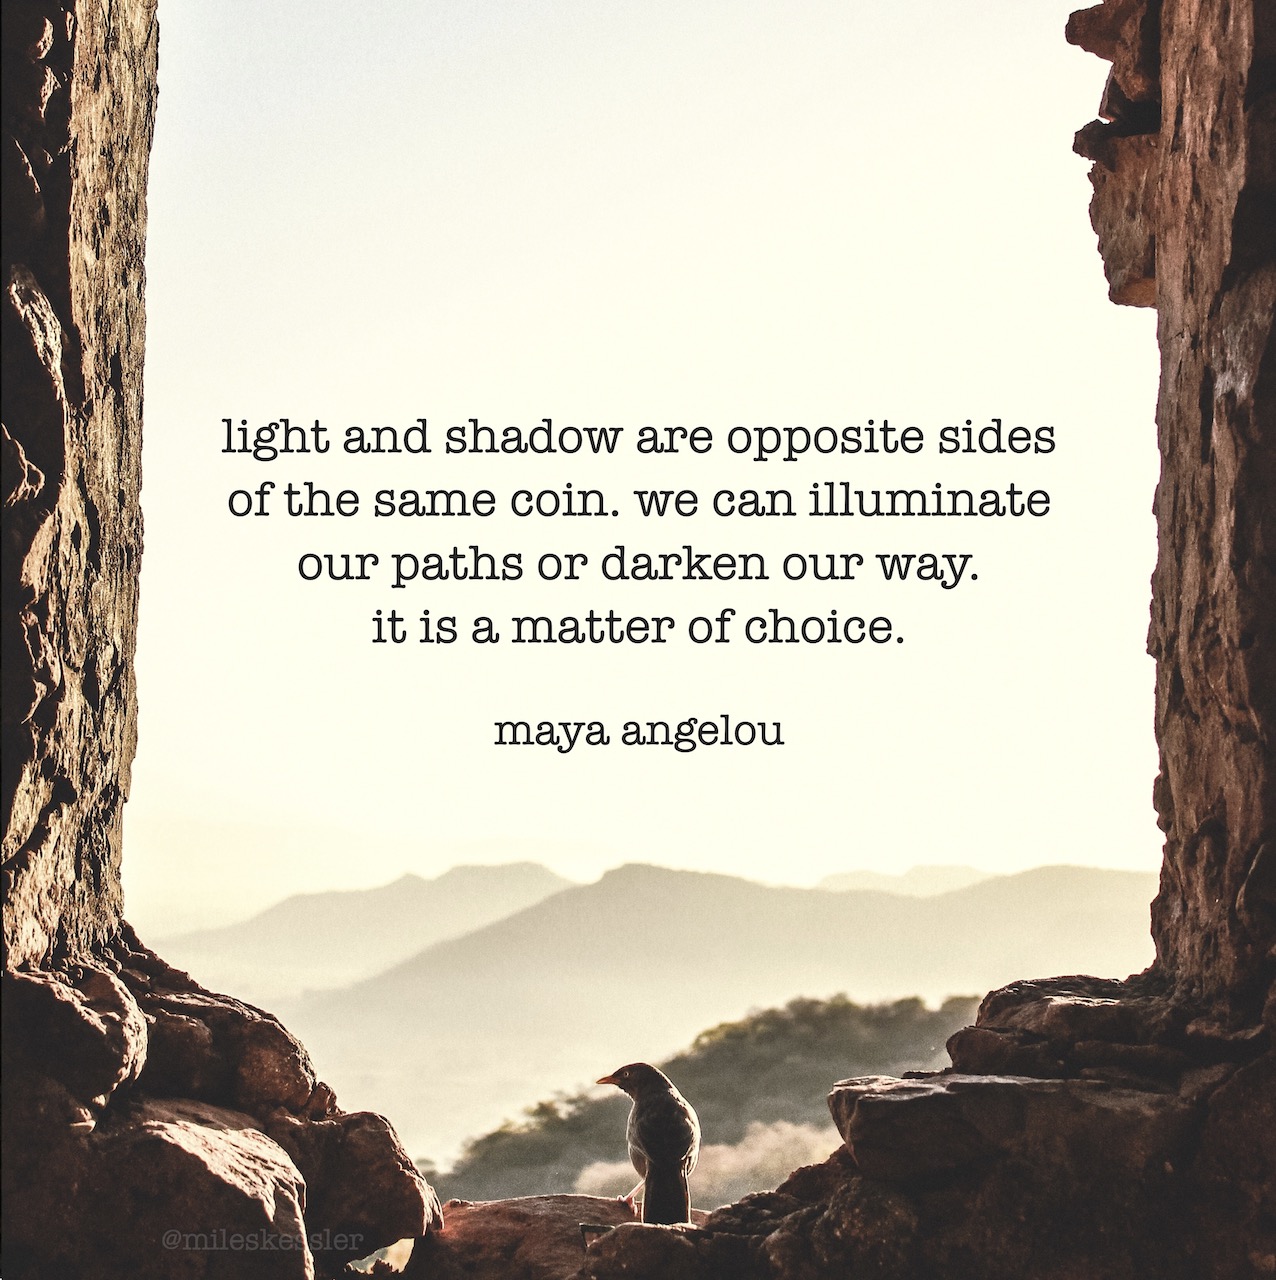 “Light and shadow are opposite sides of the same coin. We can illuminate our paths or darken our way. It is a matter of choice.” – Maya Angelou